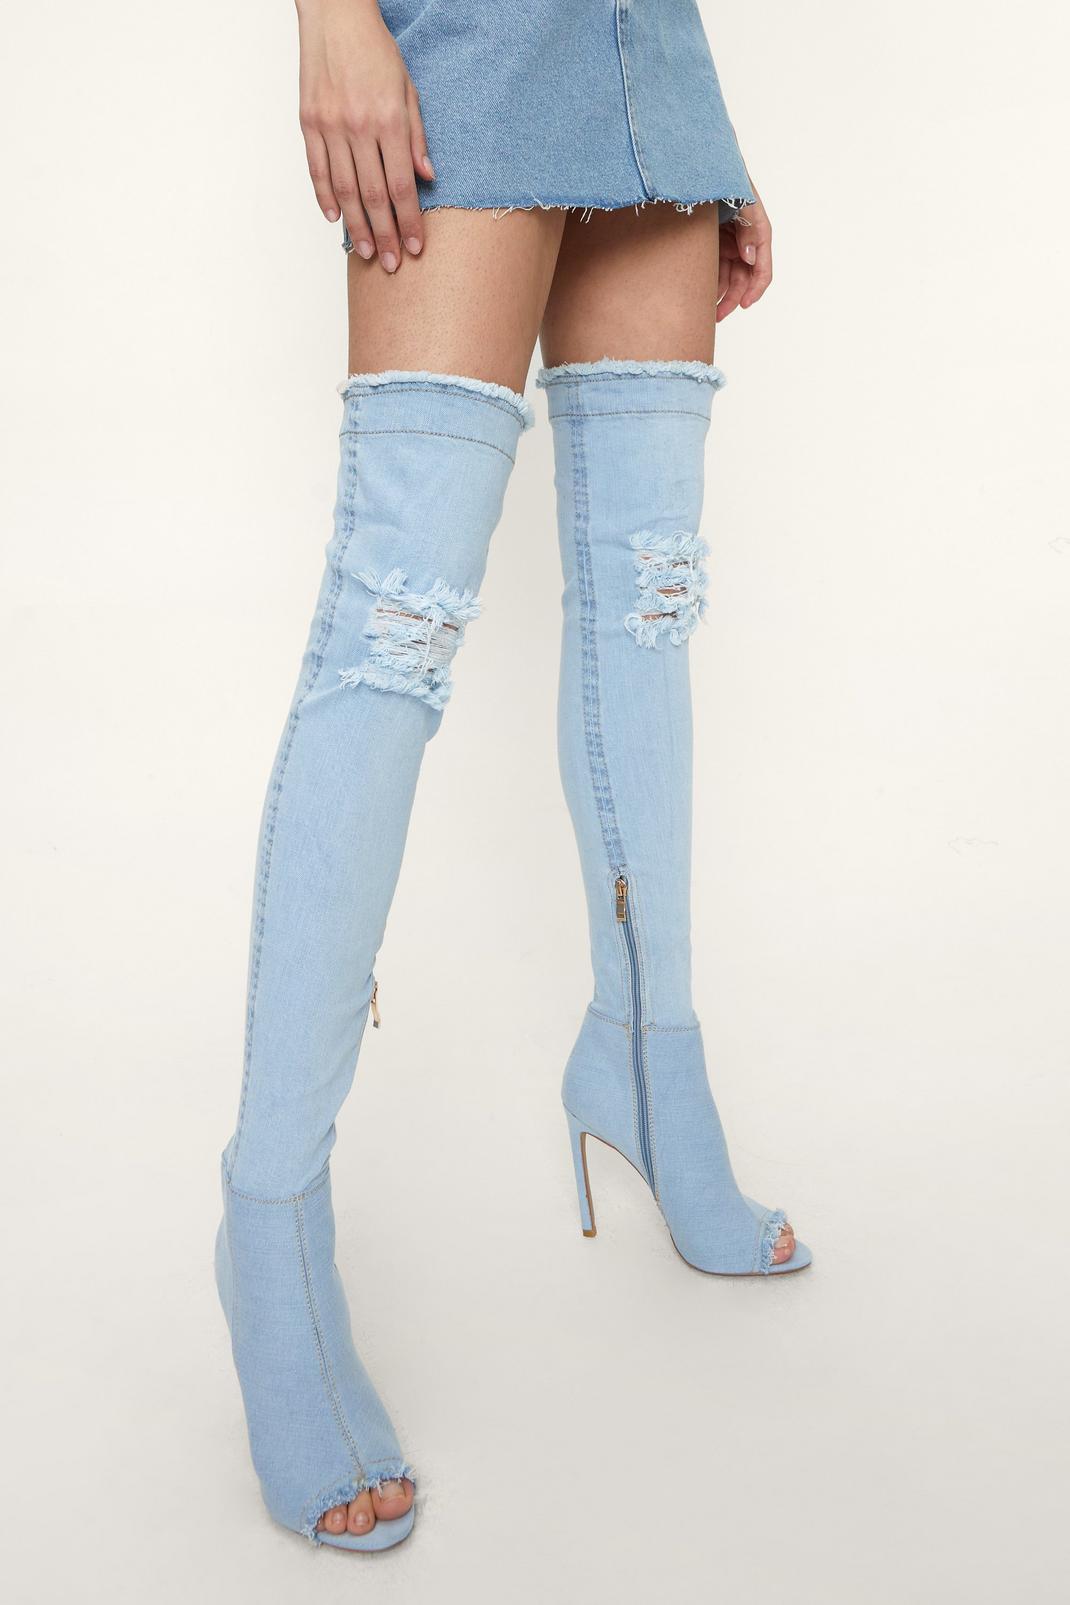 701 Denim Open Toe Over The Knee Boots  image number 2